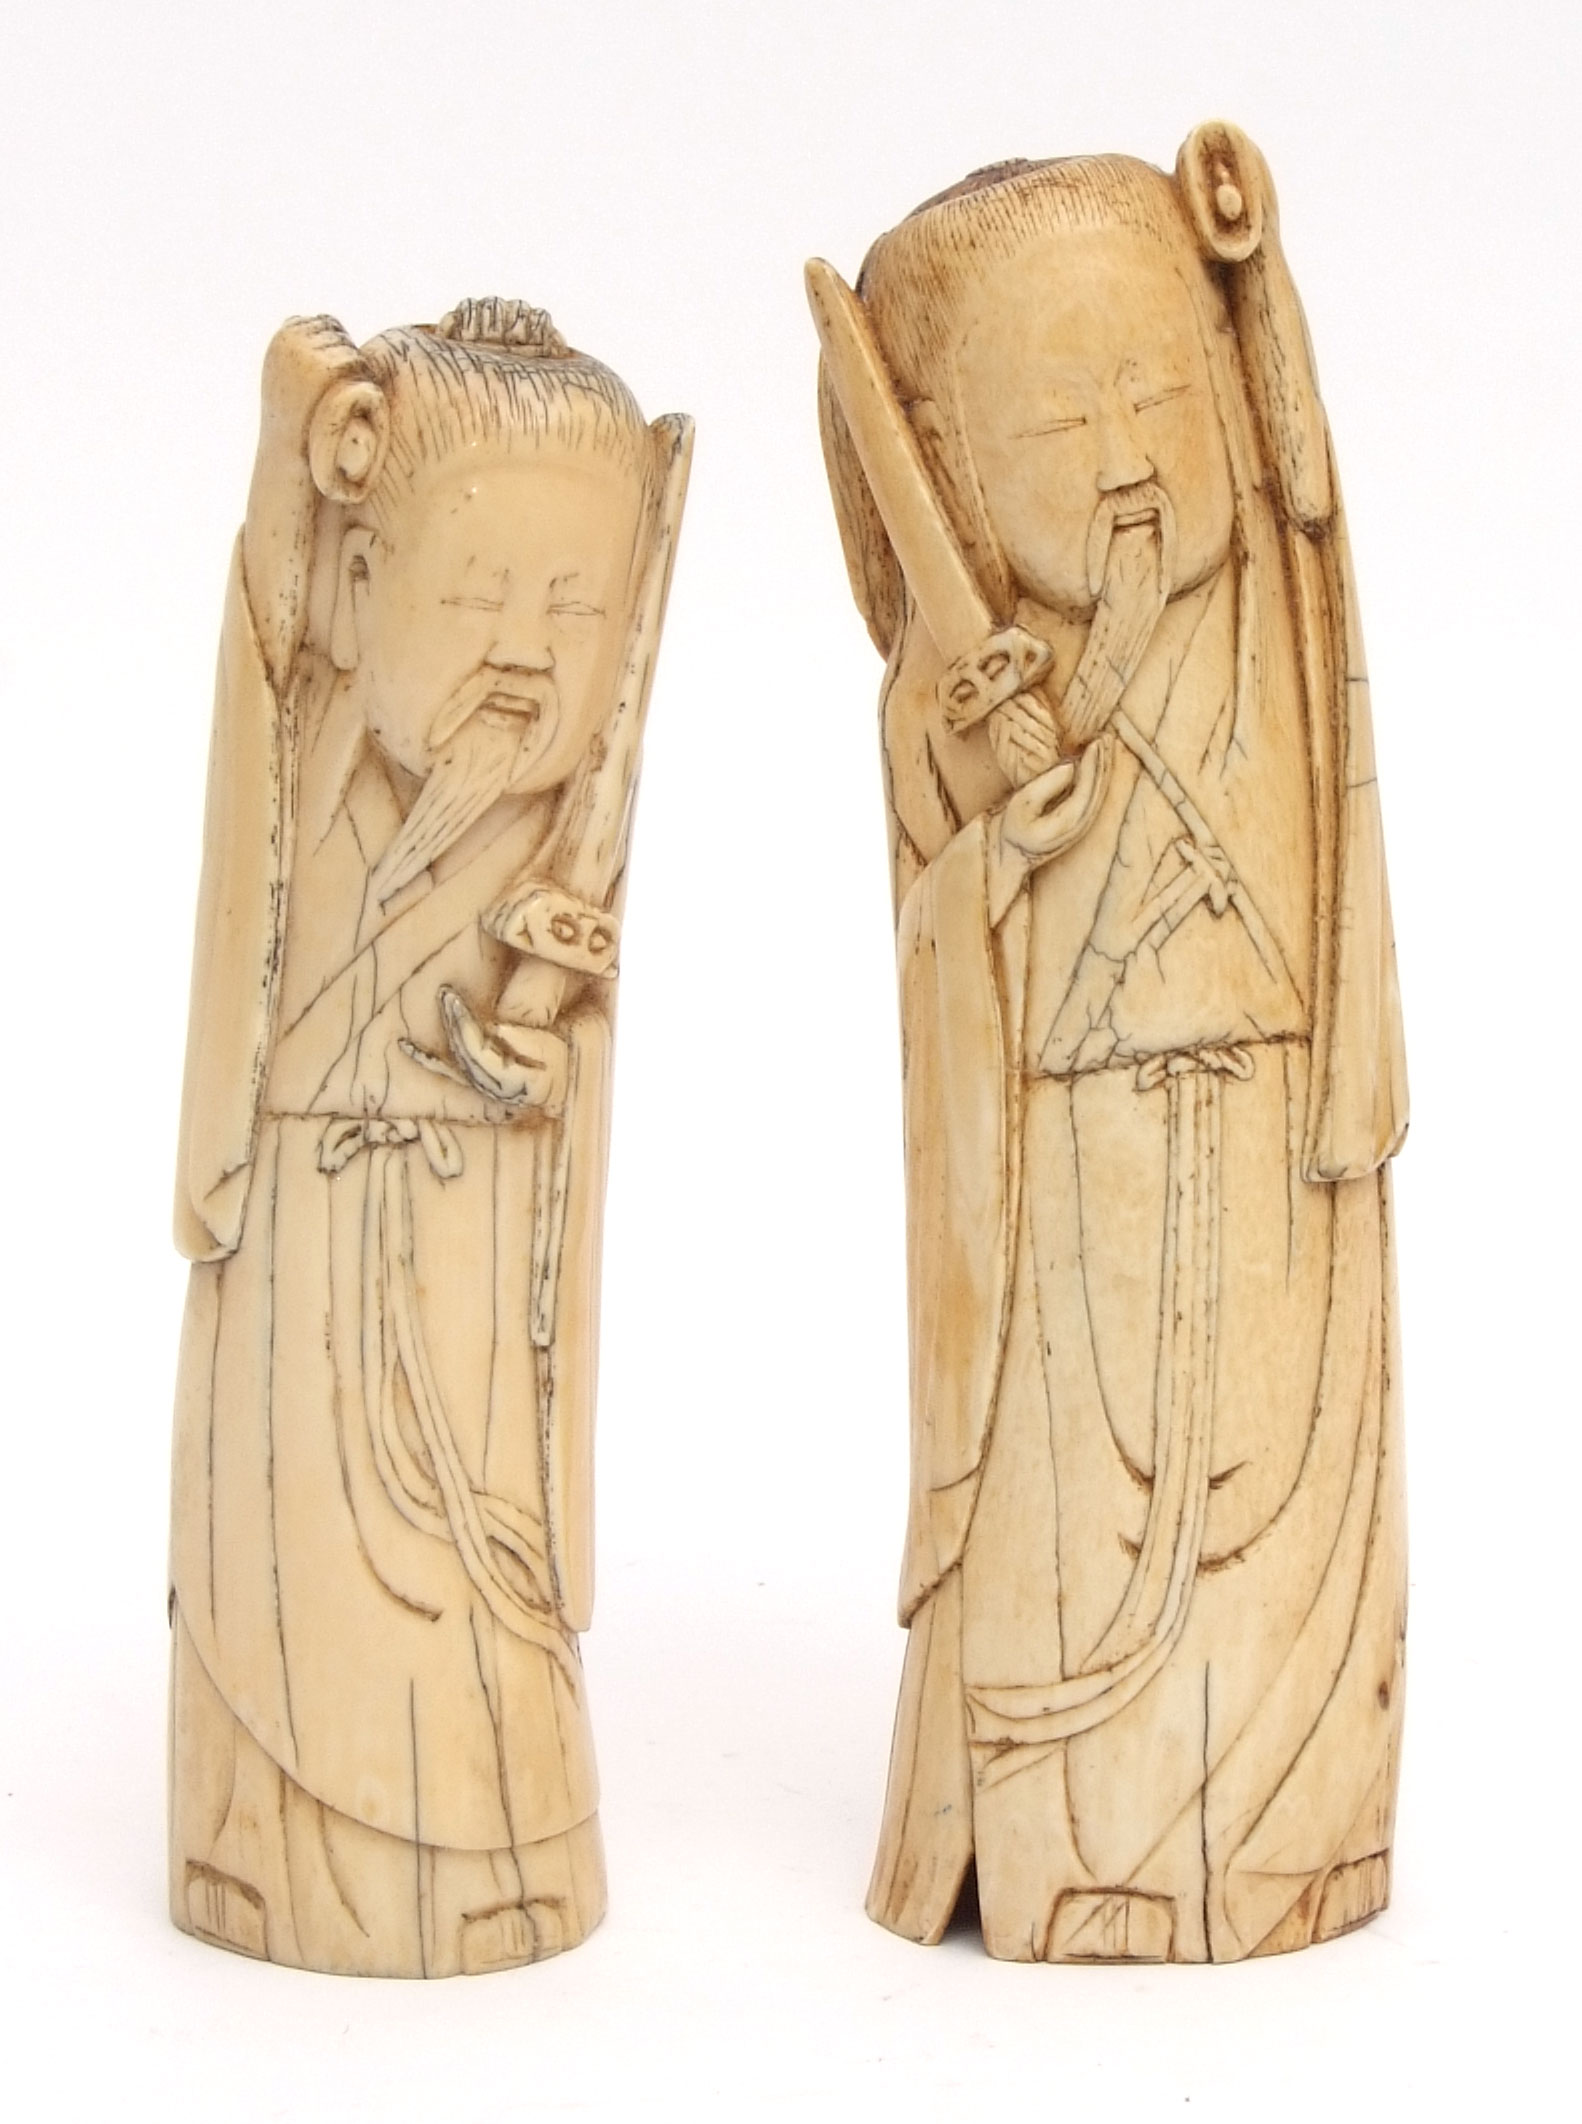 Two Chinese ivory carvings of immortals, 19 1/2cm high and 18cm high